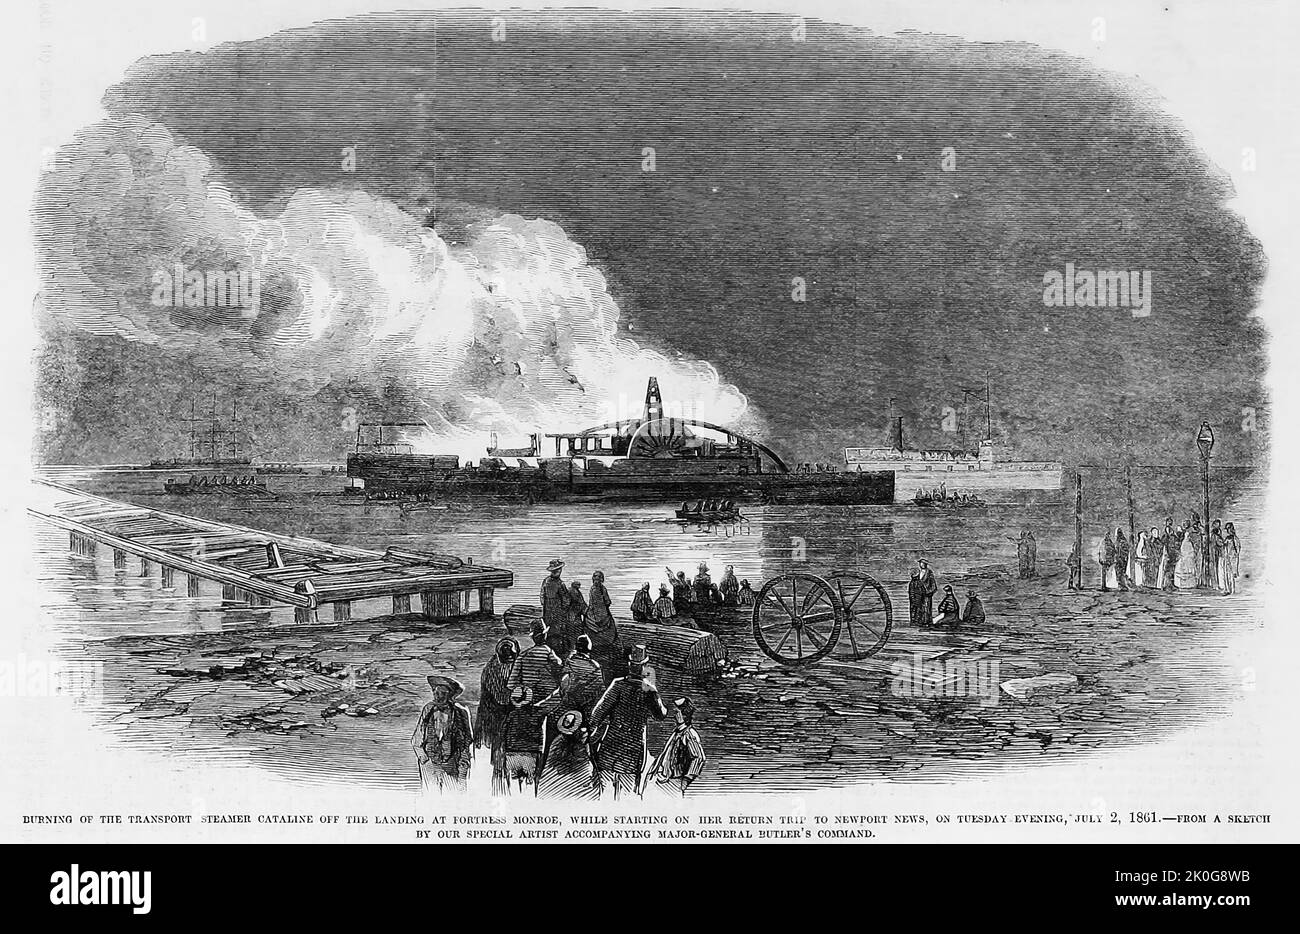 Burning of the transport steamer Cataline off the landing at Fort Monroe, while starting on her return trip to Newport News, Virginia, July 2nd, 1861. 19th century American Civil War illustration from Frank Leslie's Illustrated Newspaper Stock Photo